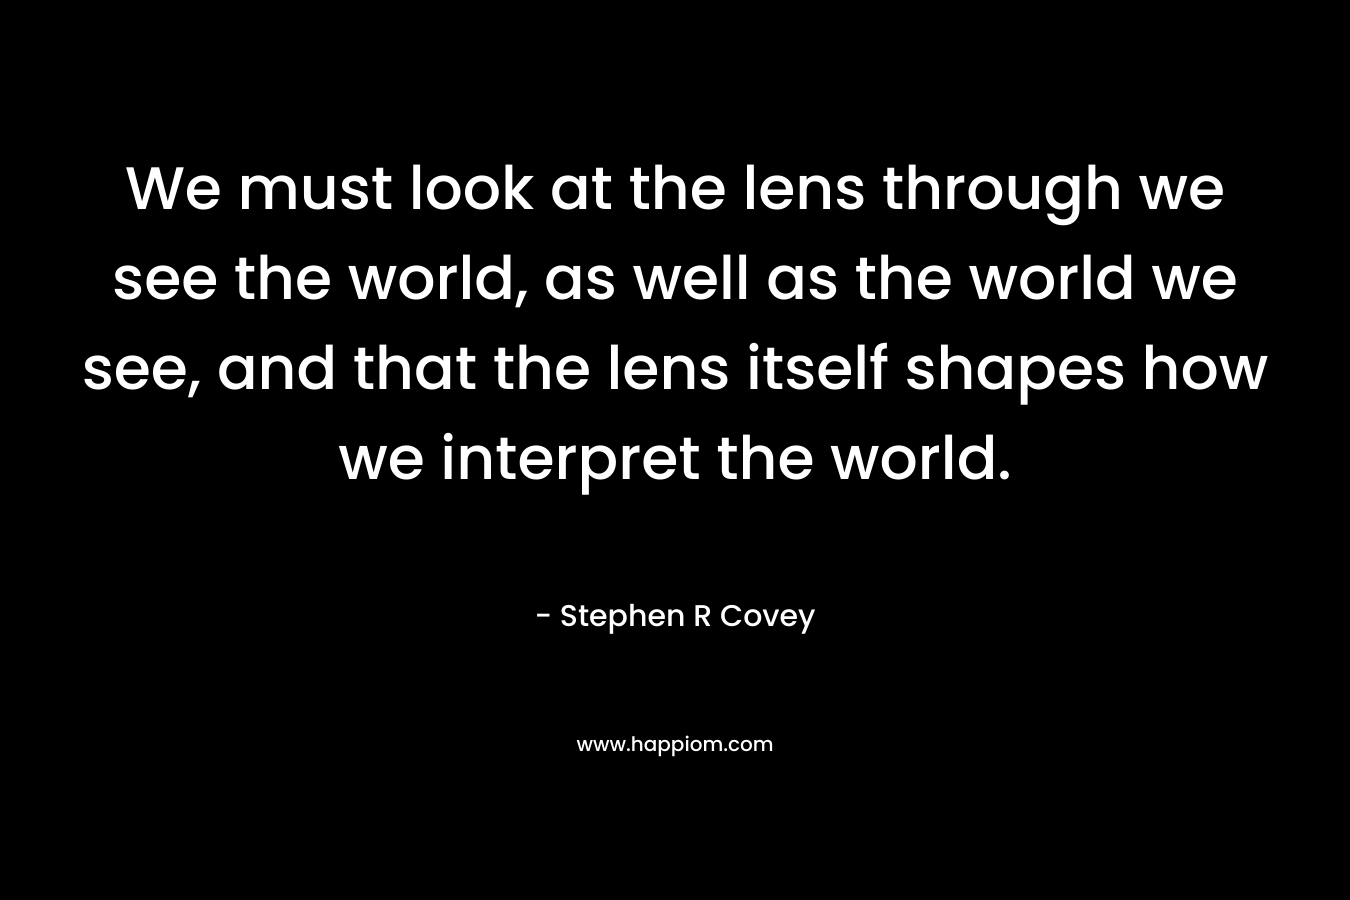 We must look at the lens through we see the world, as well as the world we see, and that the lens itself shapes how we interpret the world.